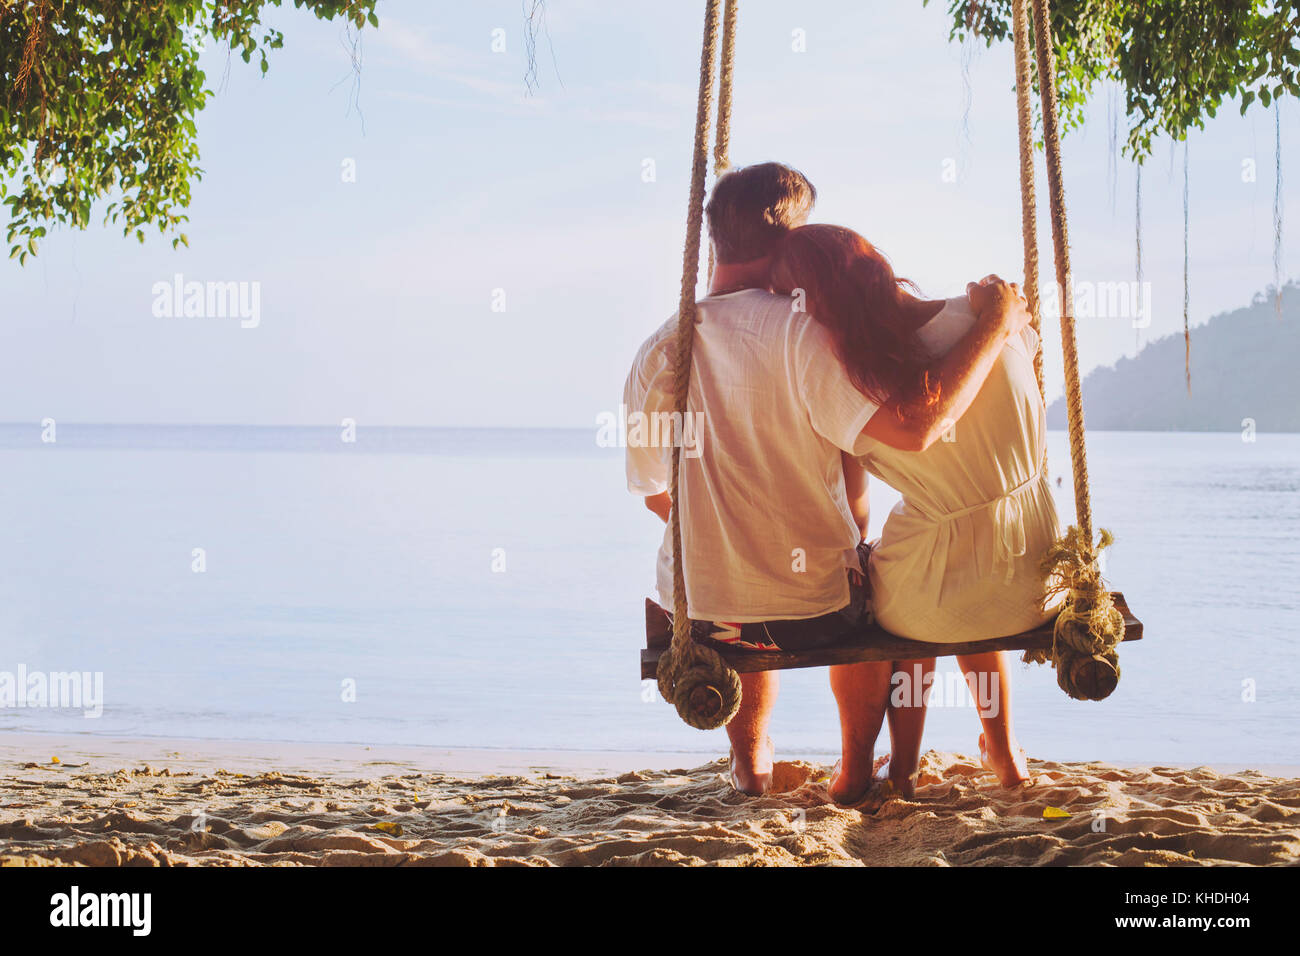 romantic holidays for two, affectionate couple sitting together on the beach on swing, silhouette of man hugging woman Stock Photo